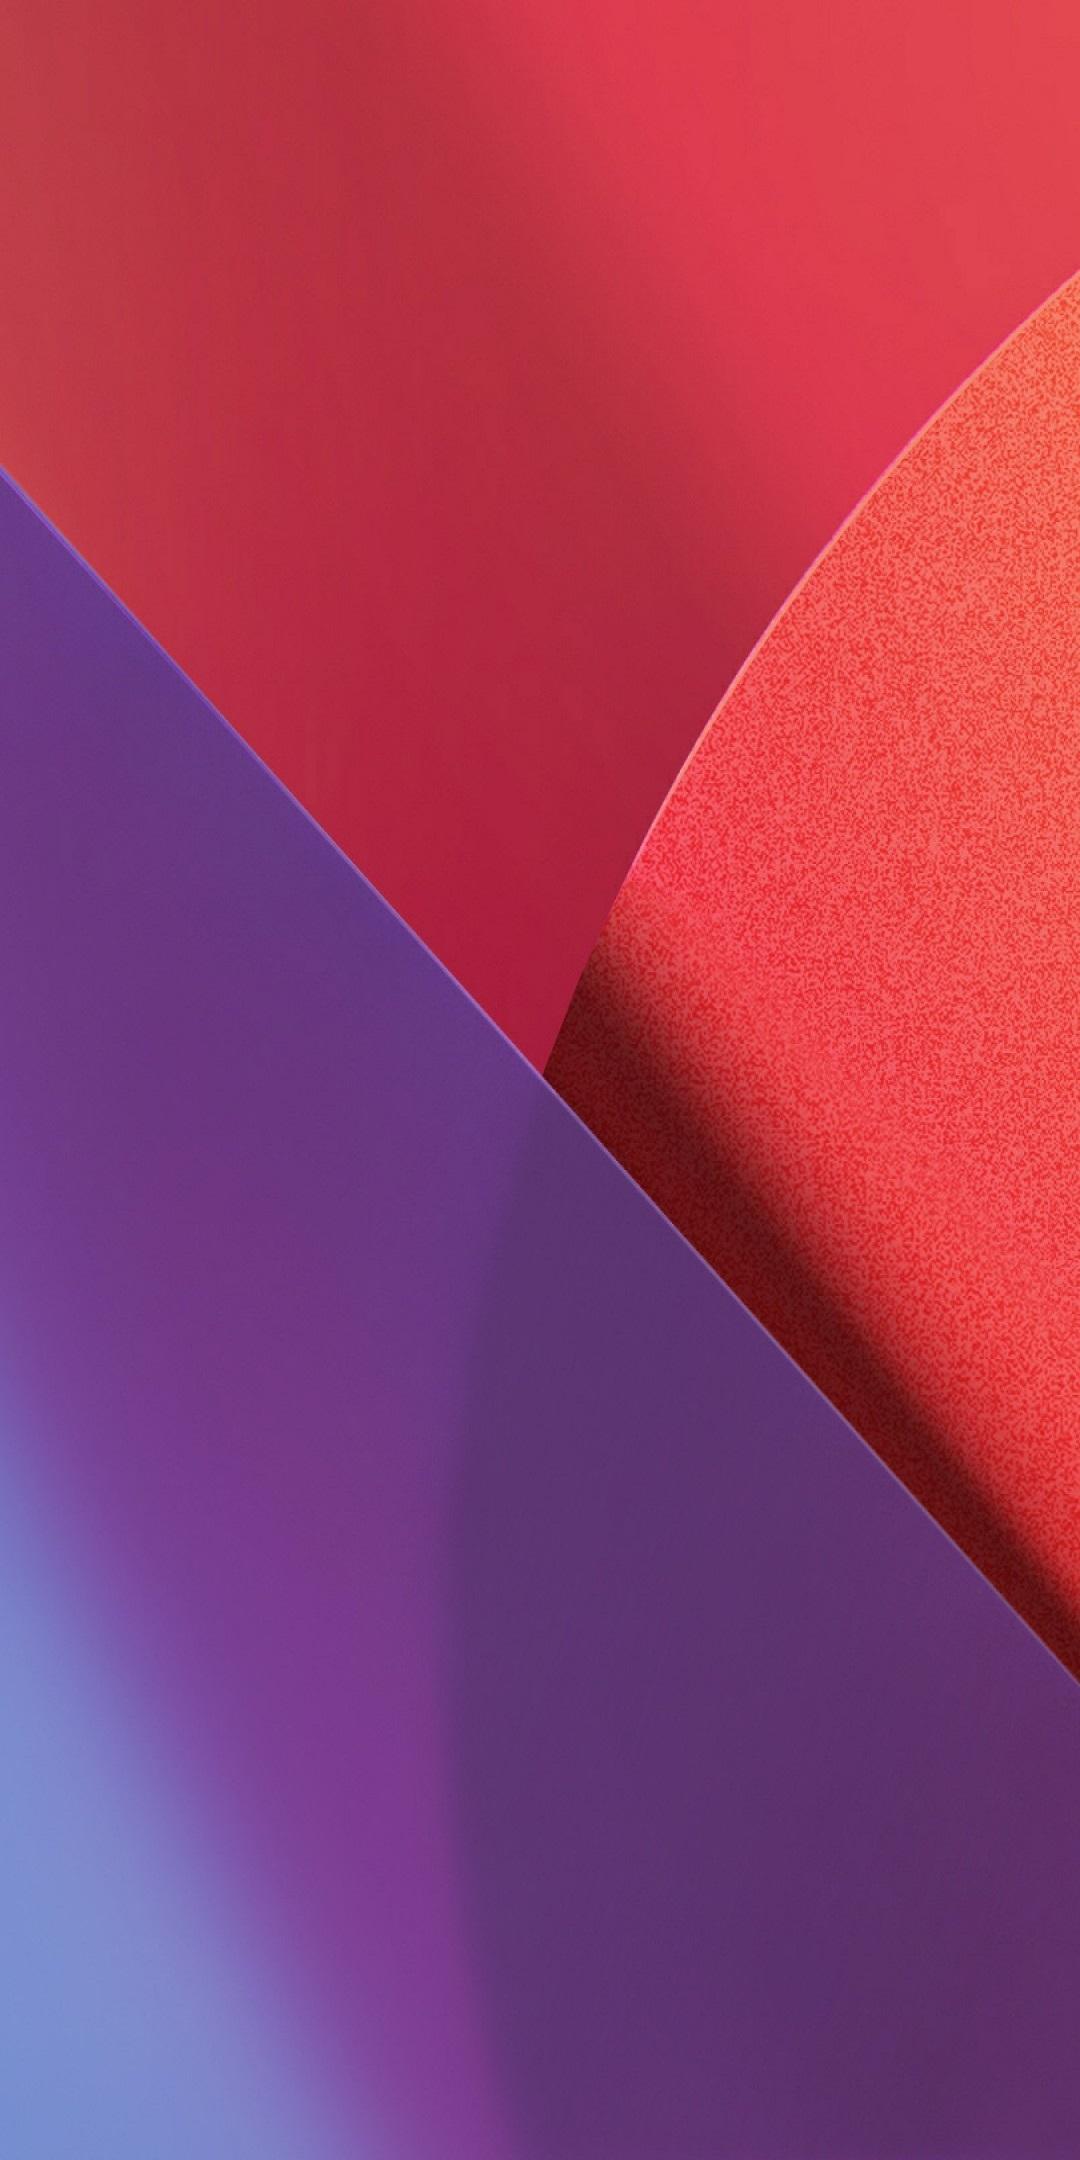 Download Redmi Note 5 Stock Wallpaper [Note Pro Also Included]